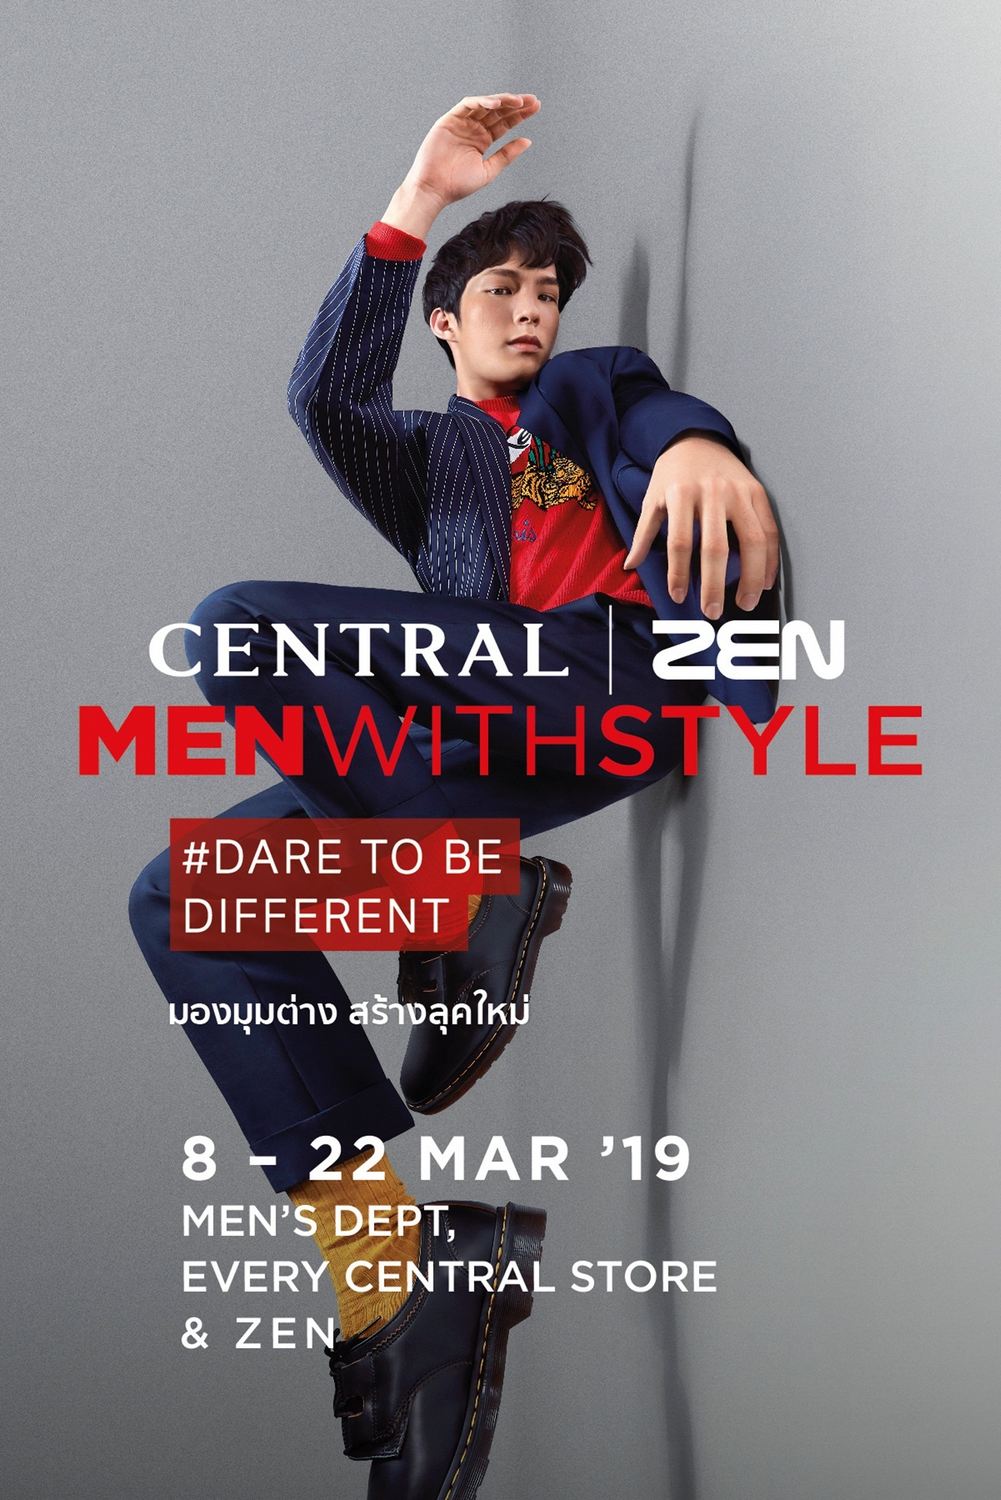 CENTRAL | ZEN MEN WITH STYLE